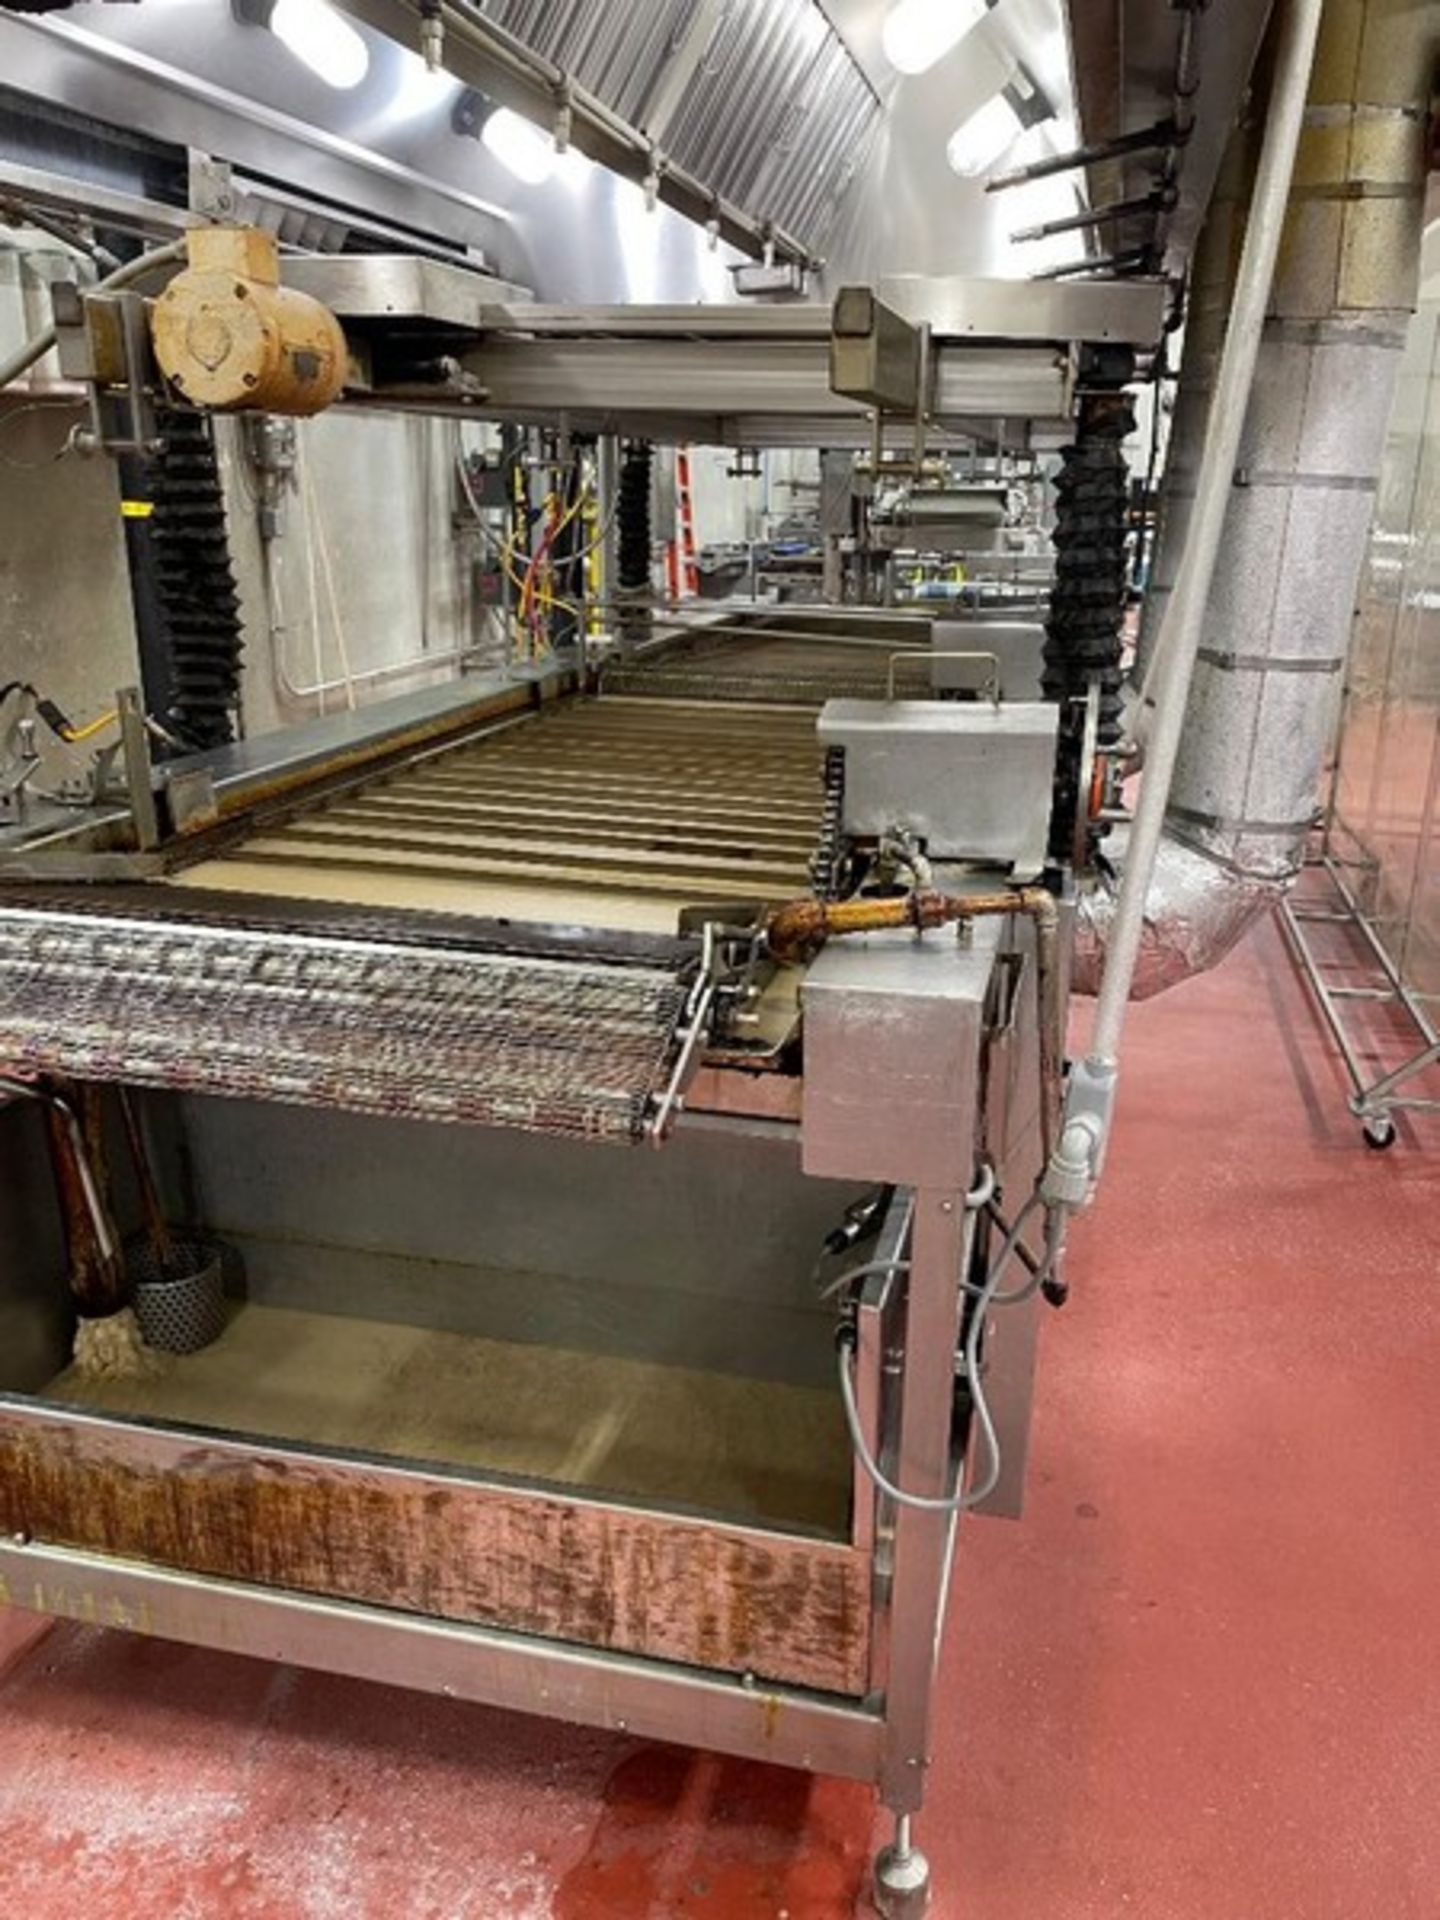 DCA S/S Doughnut Fryer, System was Completely Rebuilt in 2004 by Topos Mondil, Aprox. 40" Wide x - Image 5 of 8